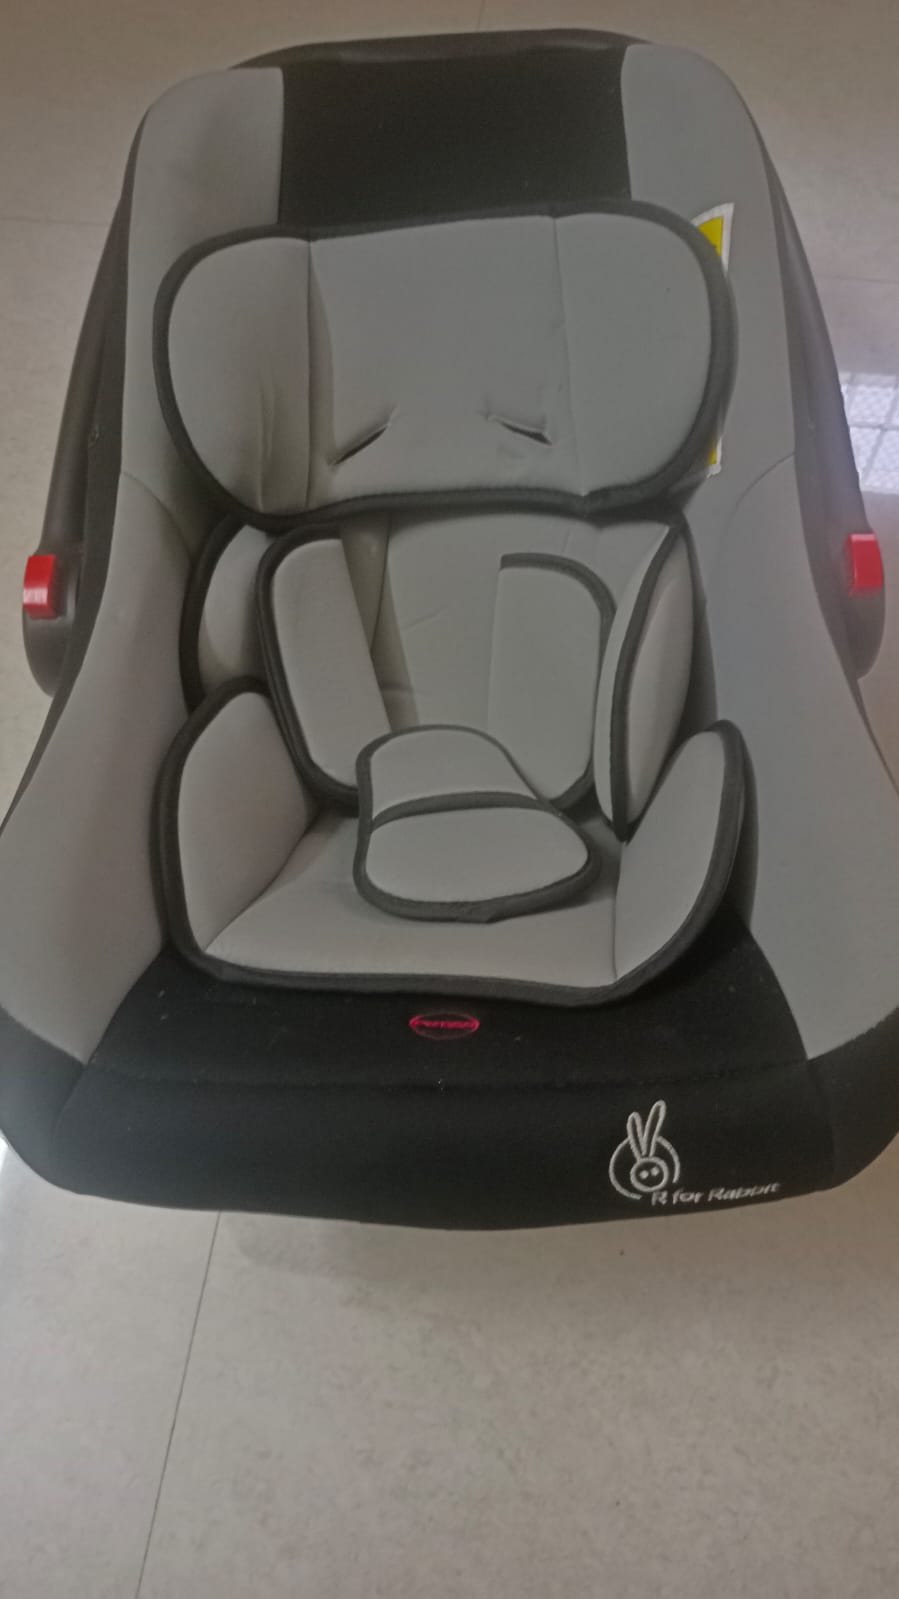 R for Rabbit Picaboo Infant Car Seat